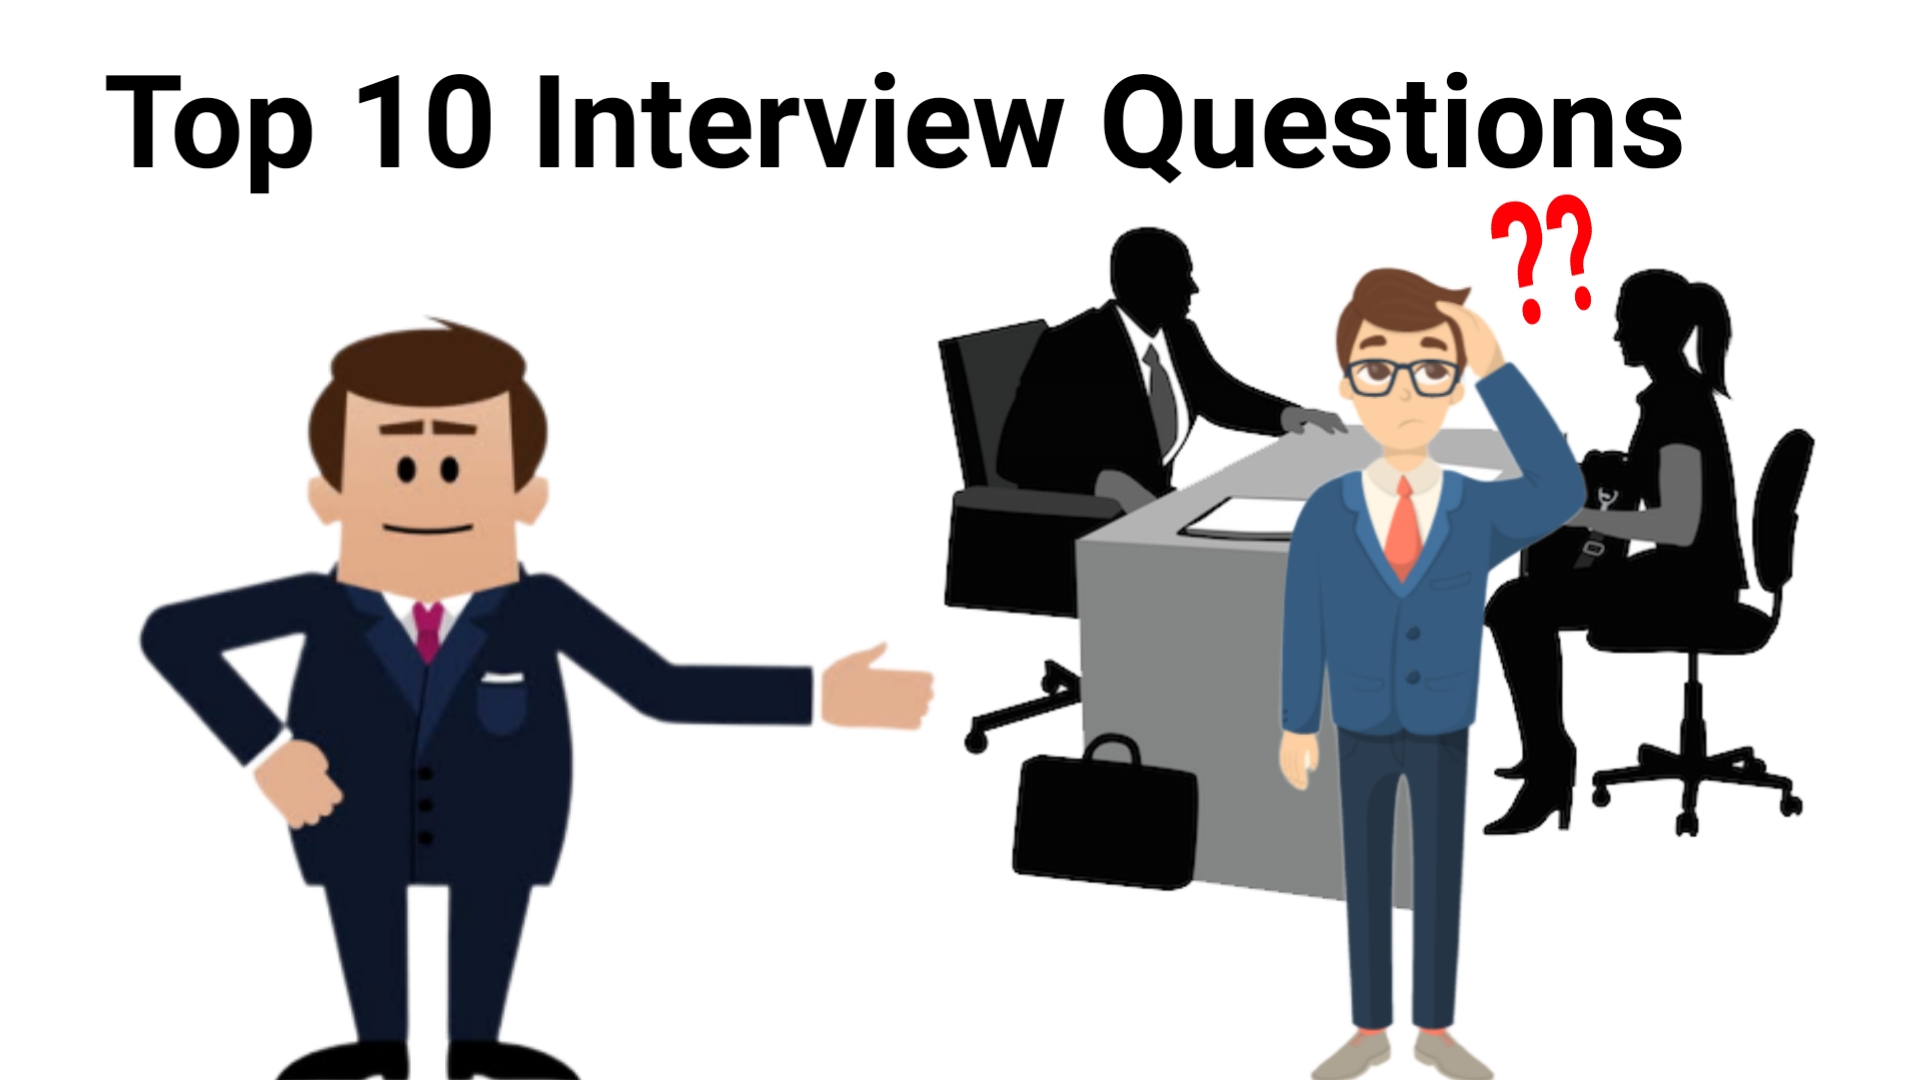 Top 10 Job Interview Questions And Answers